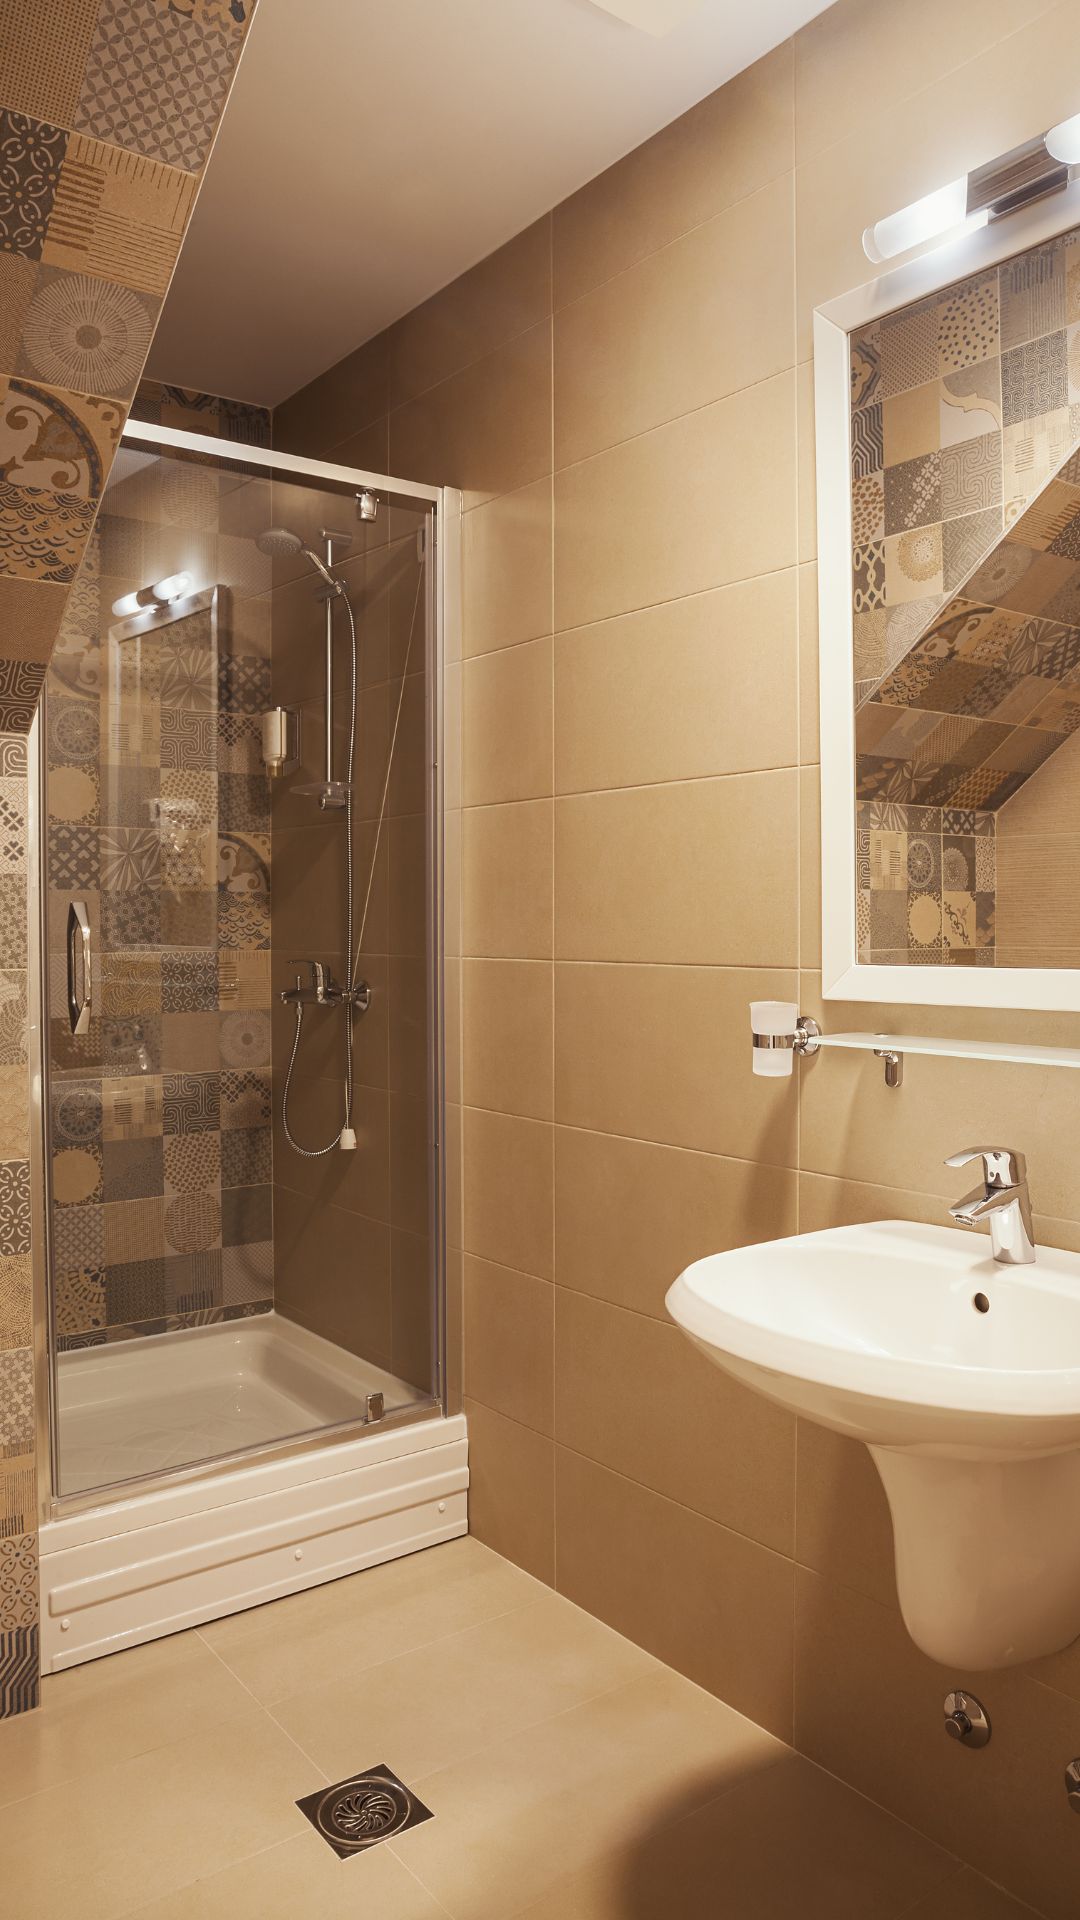 DIY Tips and Tricks for Small Half Bathrooms